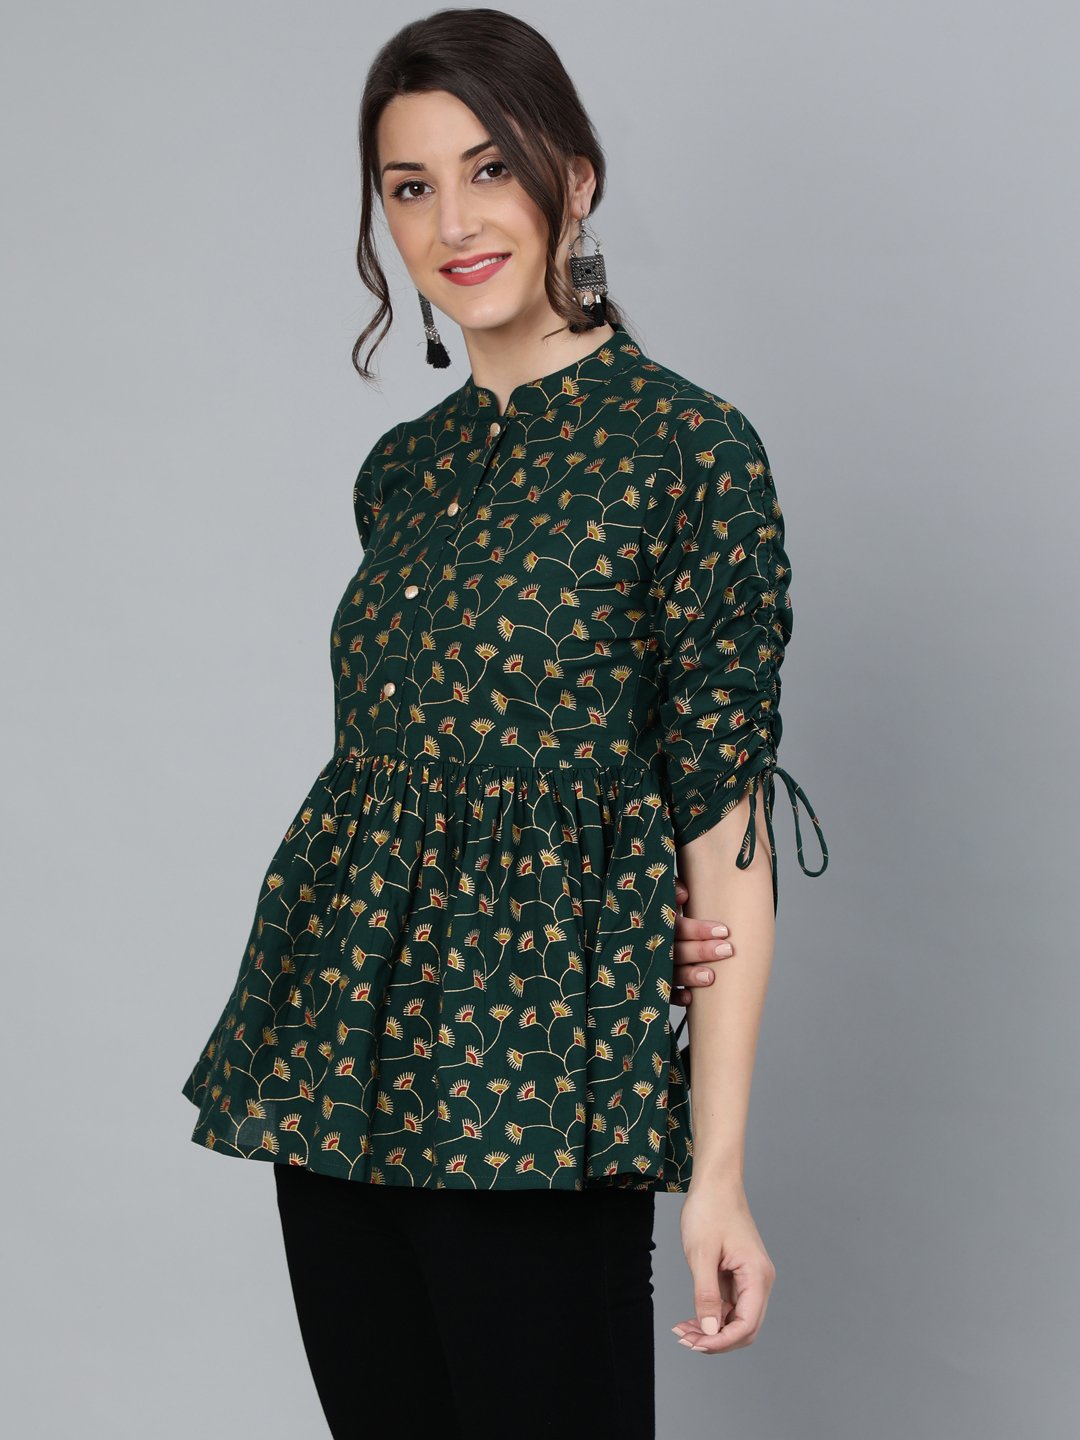 Women's Green Floral Printed Top With Mandarin Collar & Three Quarter Sleeves - Nayo Clothing